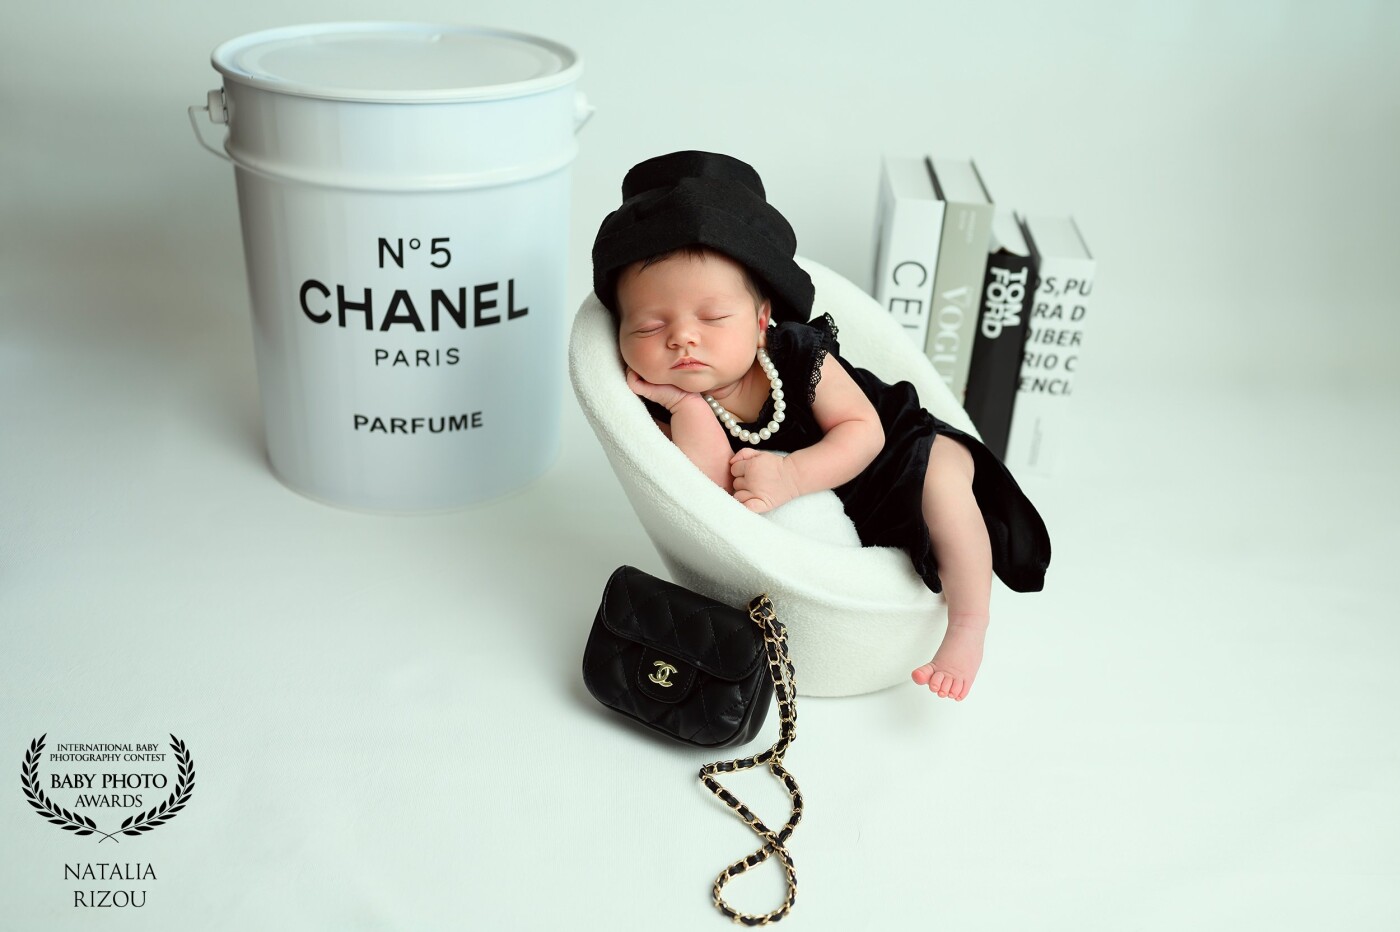 It can’t be denied that the concept of a female is that she is born a woman and not molded into one. Just by taking a simple, small black dress and a discreet hat you have the utmost baby outfit.